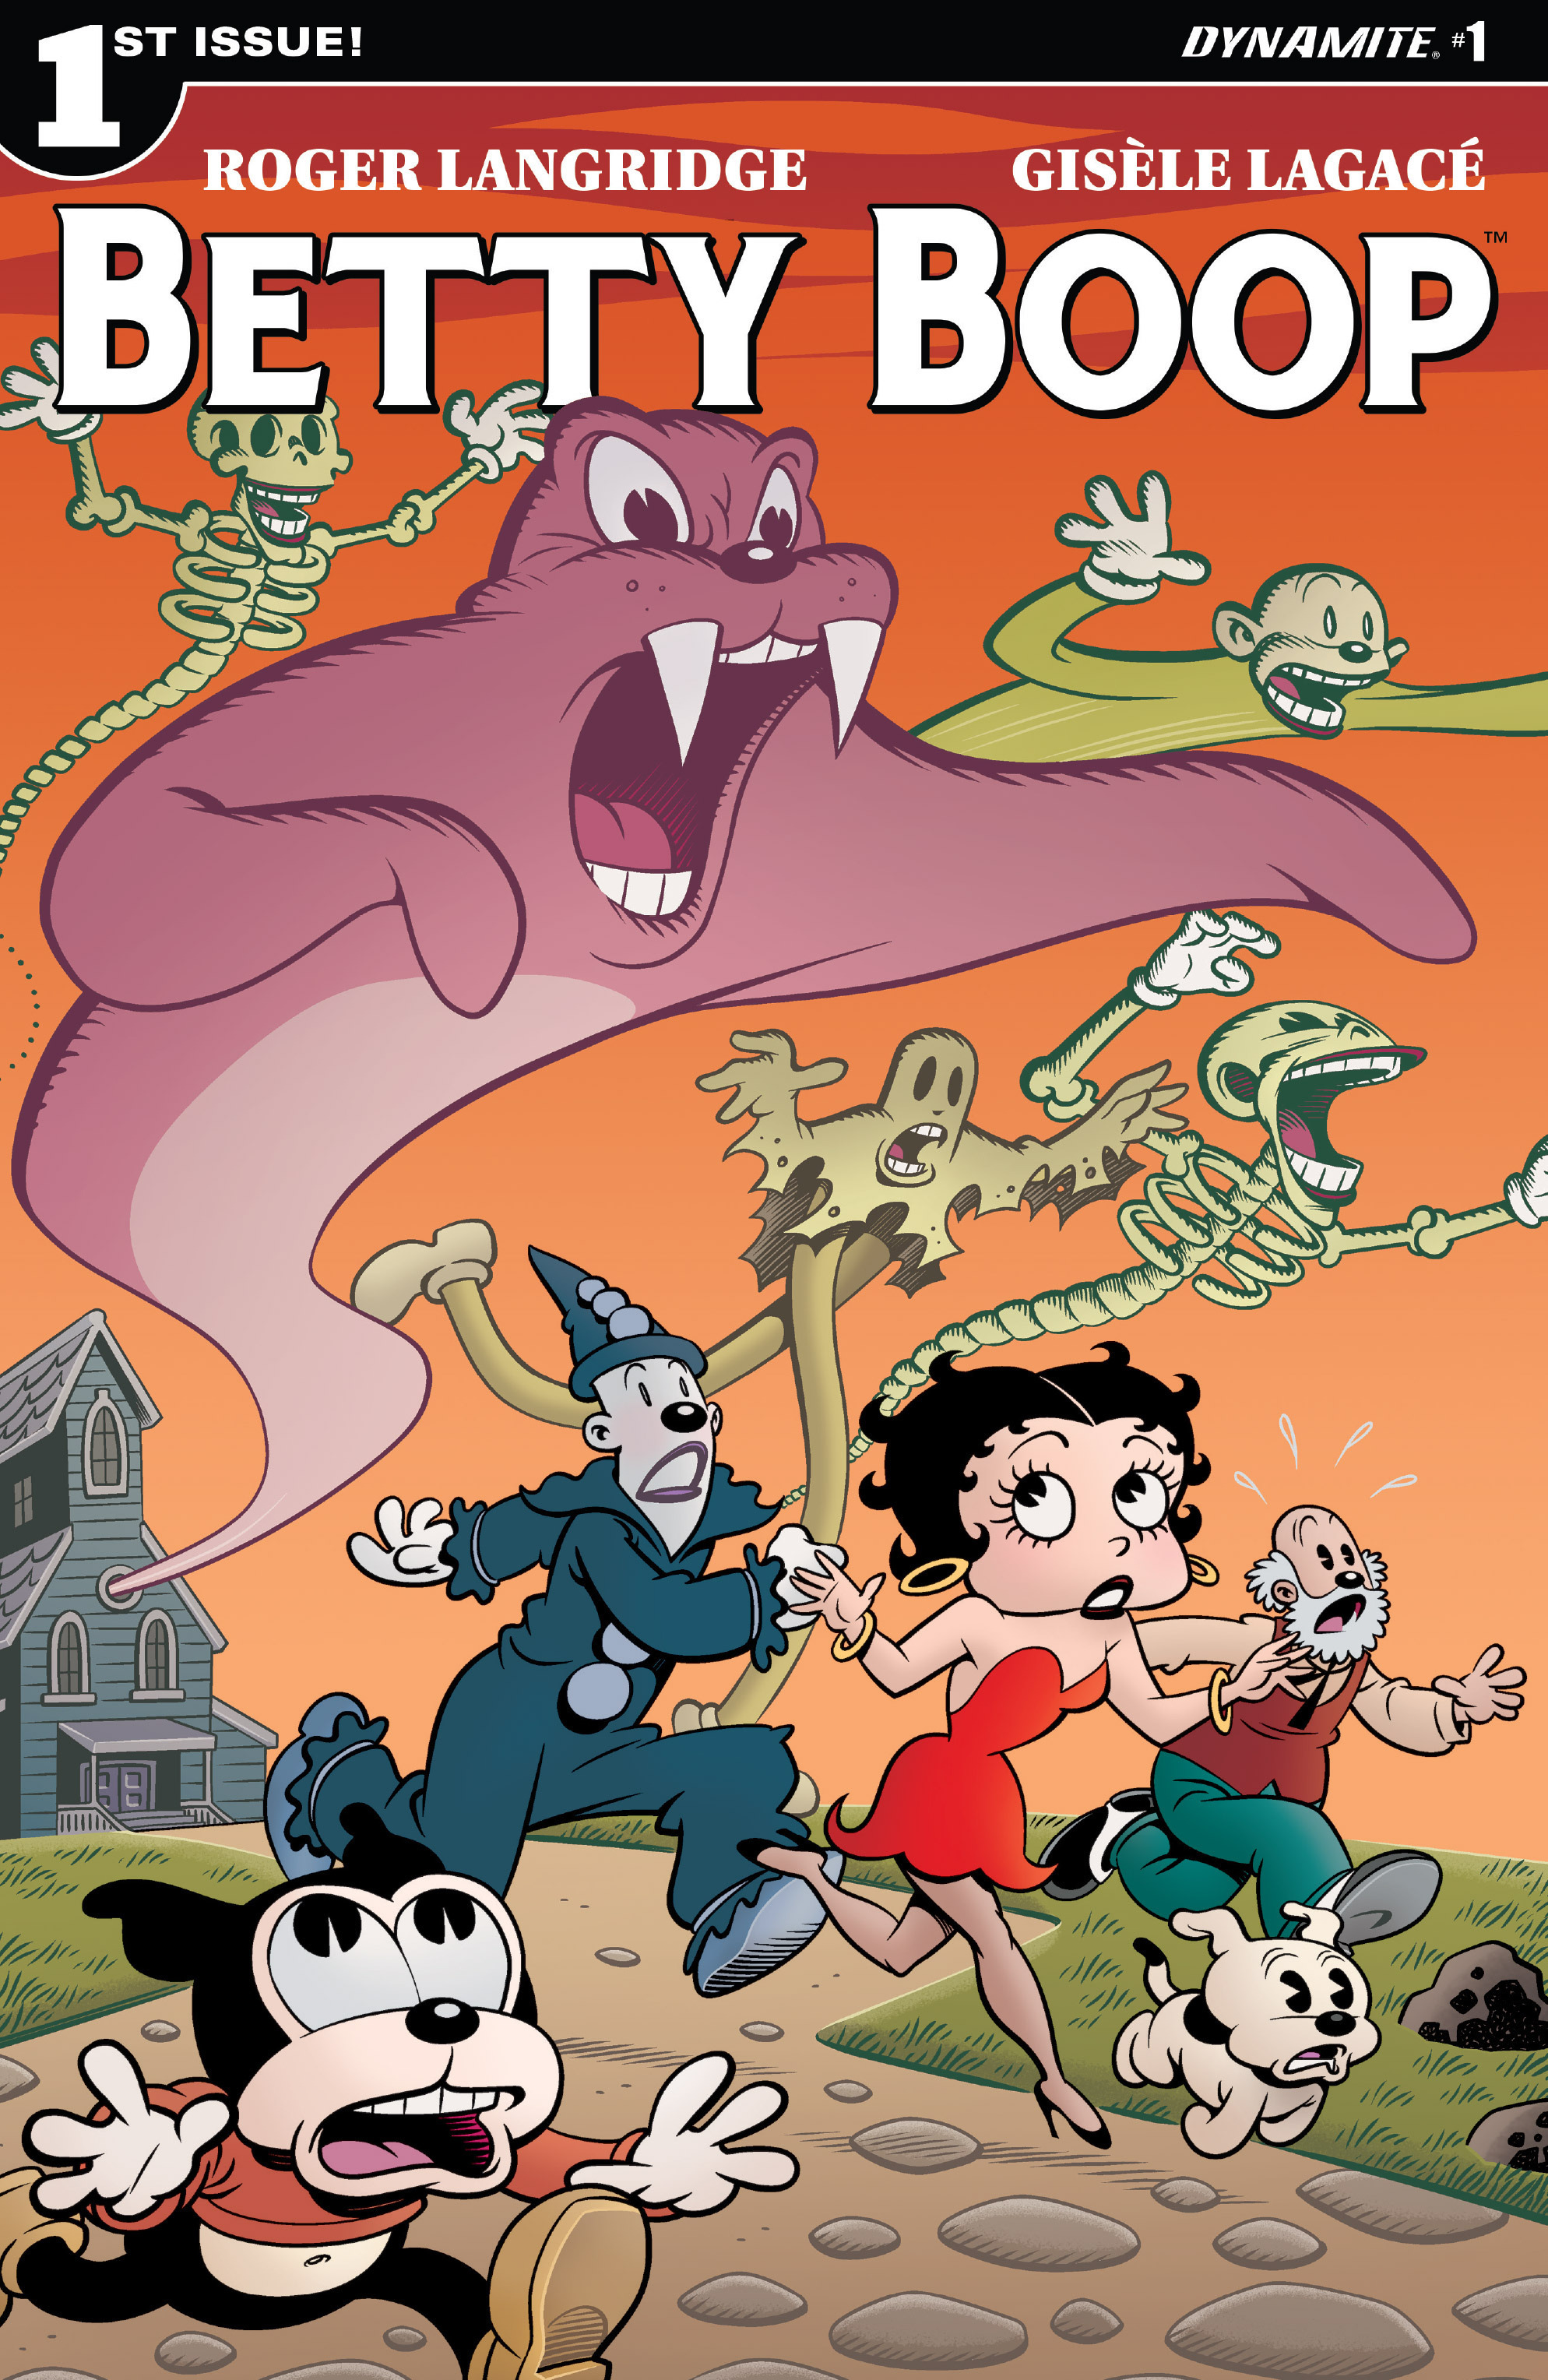 Read online Betty Boop comic -  Issue #1 - 2